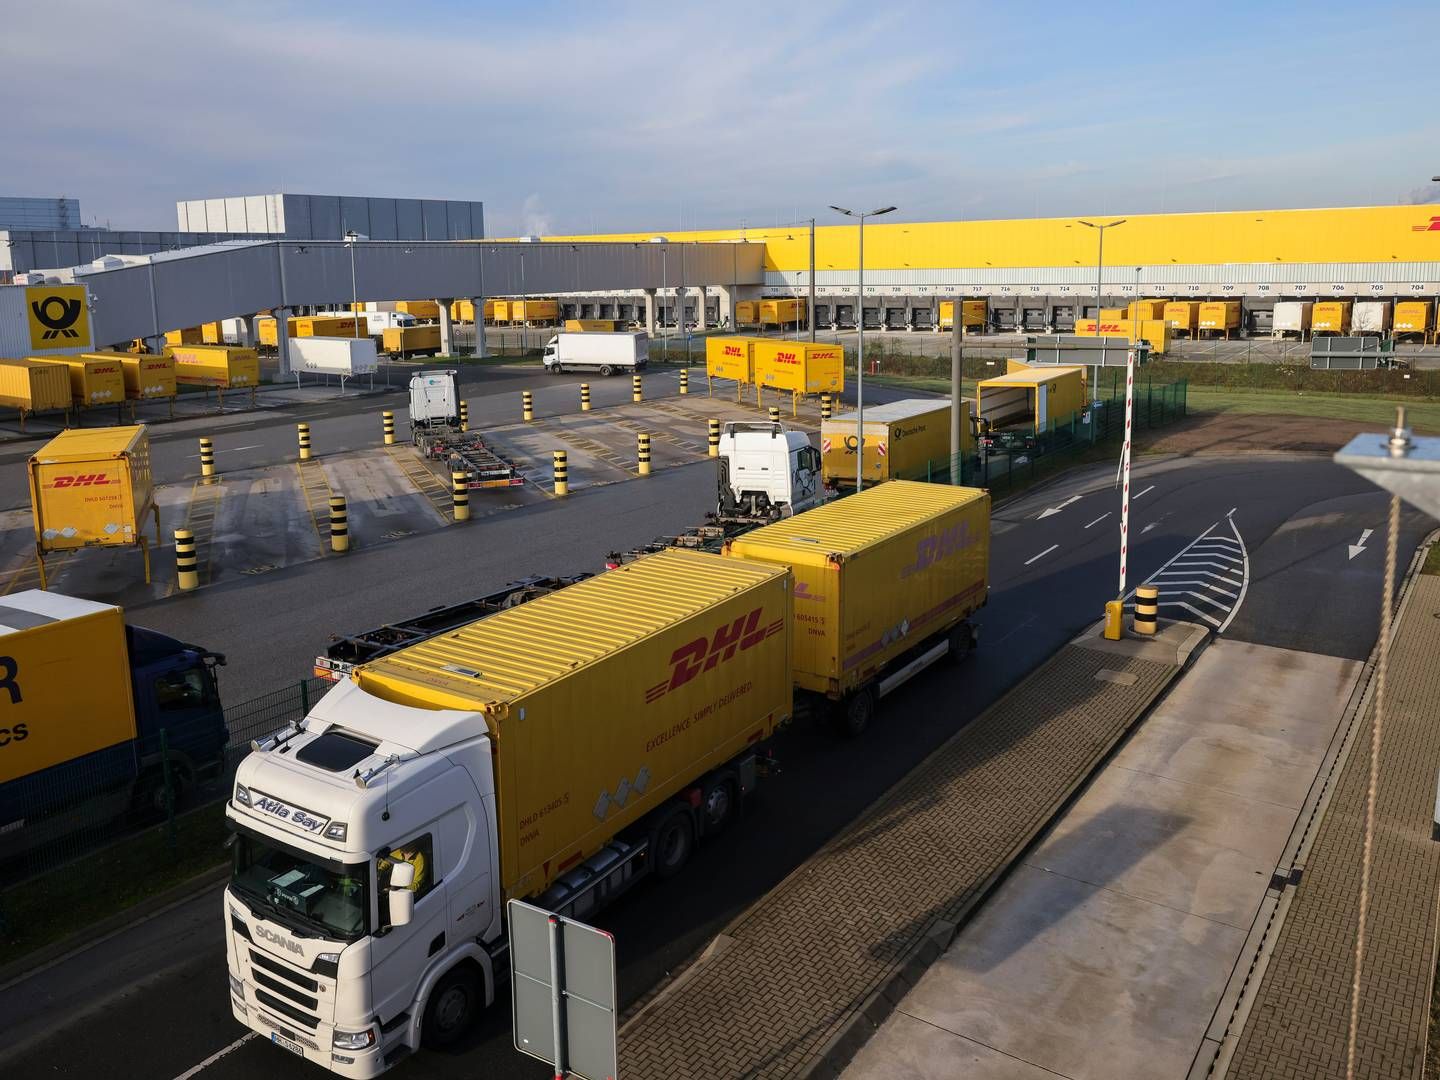 By 2030, 60% of DHL's fleet of cars and trucks will be electric according to the group's climate target. | Photo: Christian Charisius/AP/Ritzau Scanpix